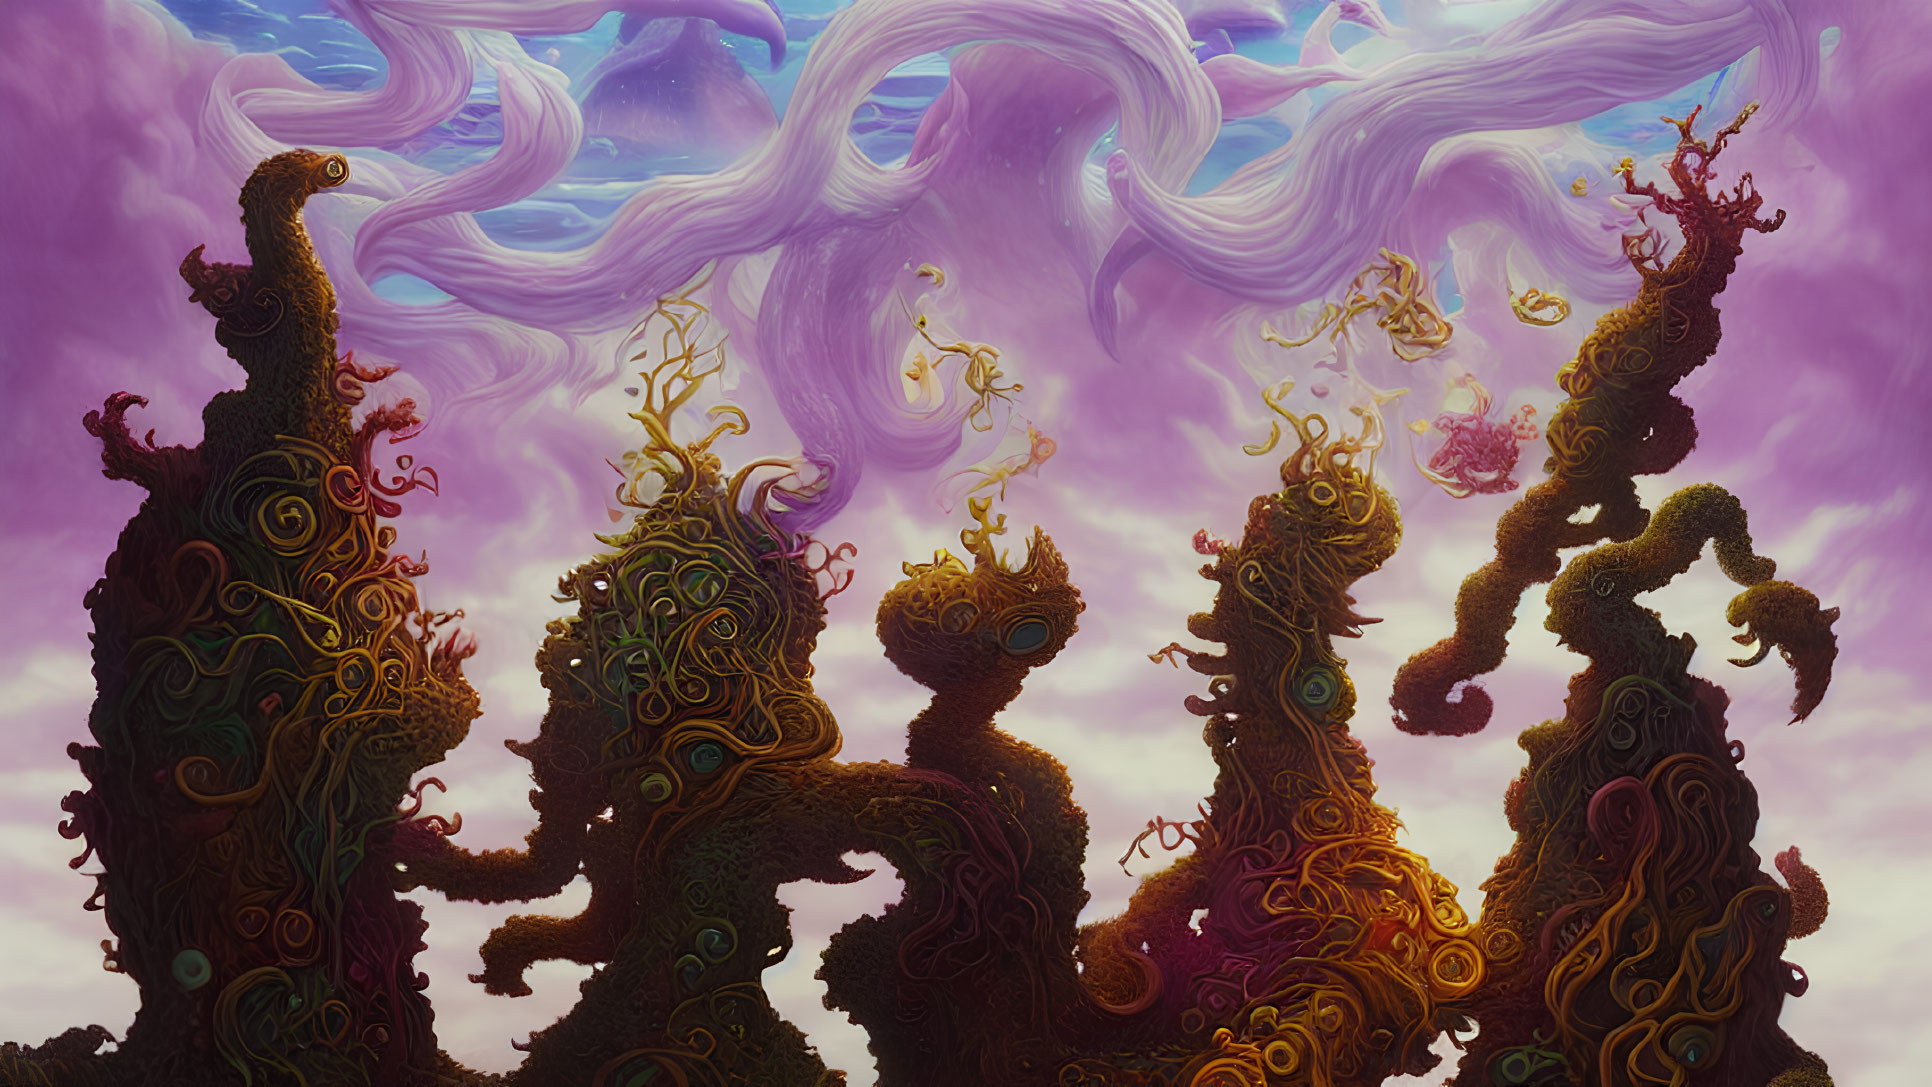 Surreal landscape with twisted tree-like structures under a purple sky